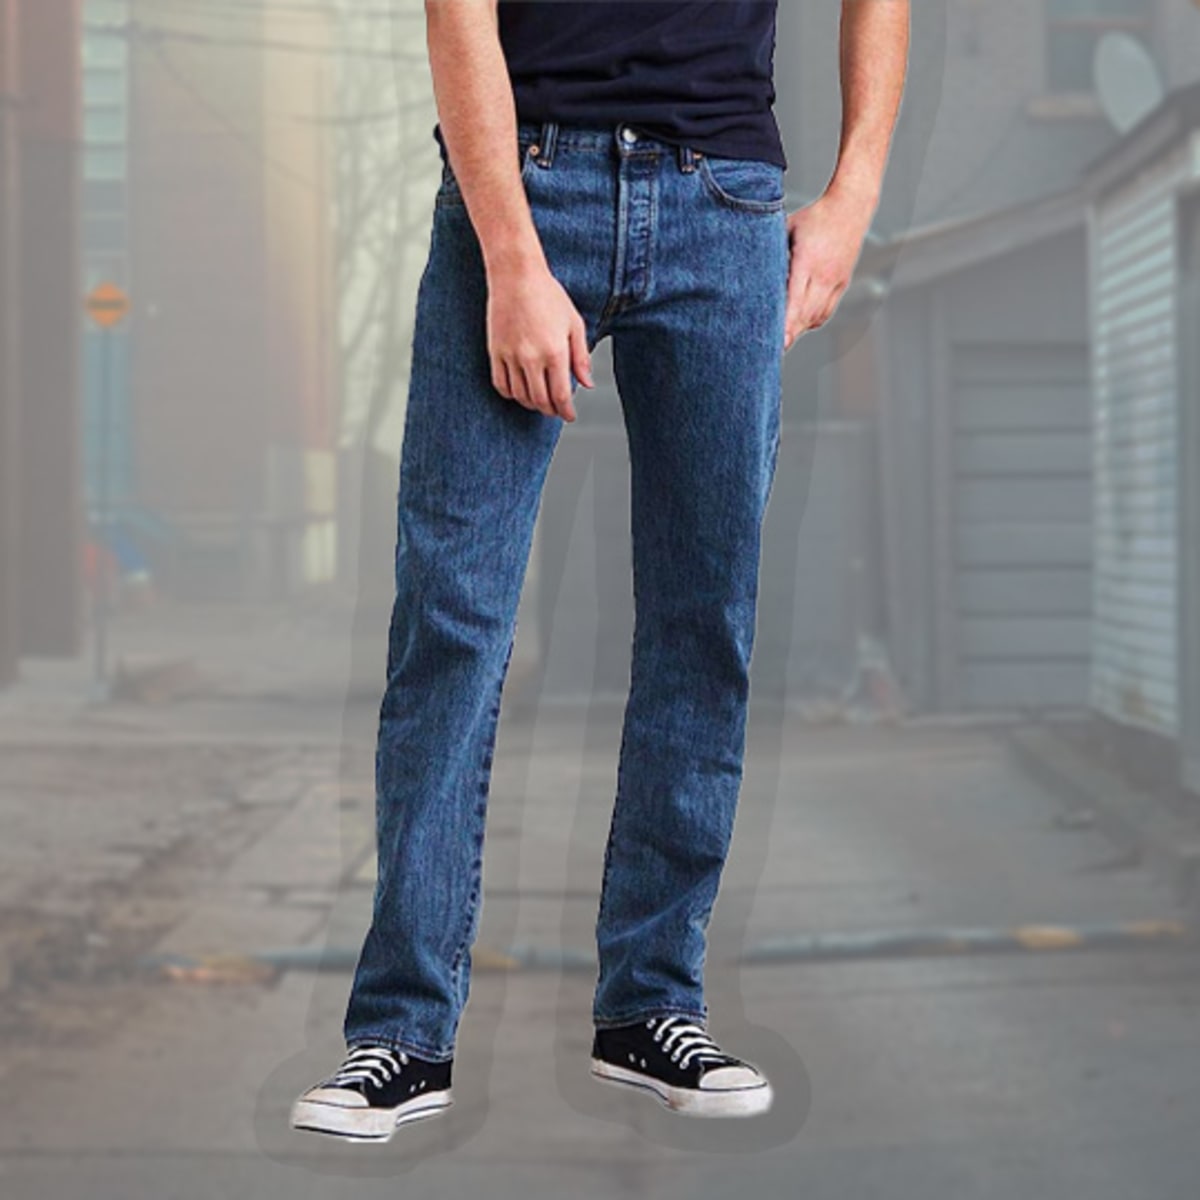 Levi's 501 Jeans Are Just $37 During Prime Day Sale - Journal